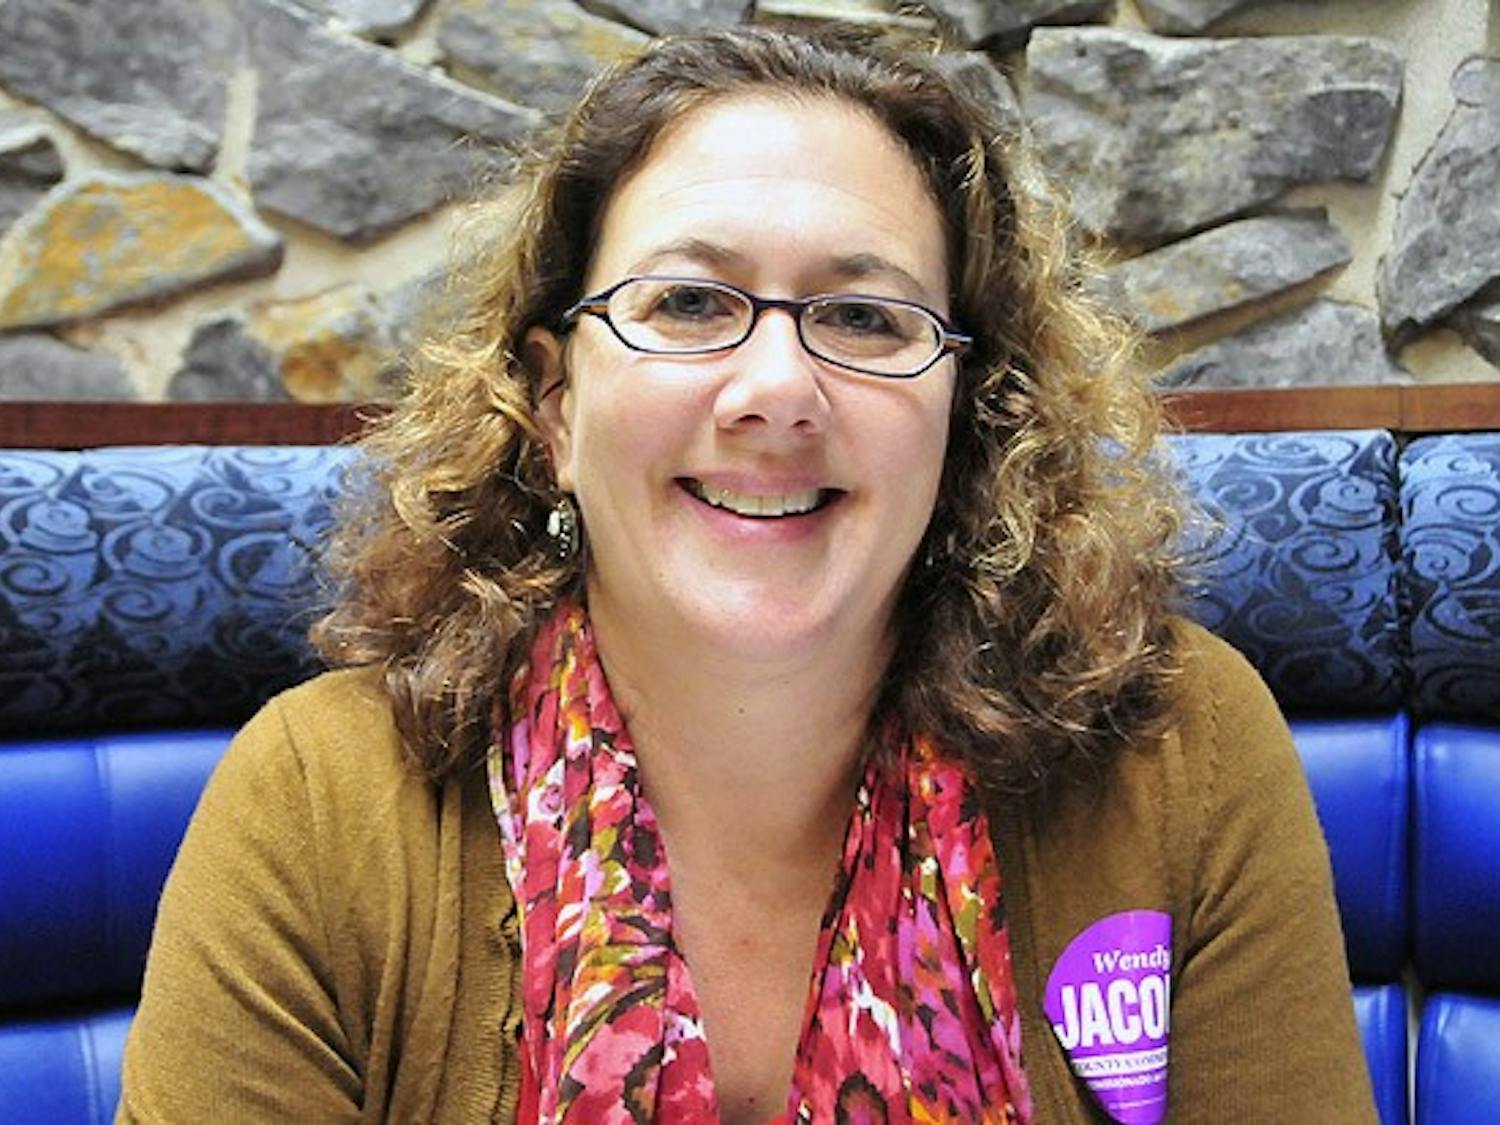 Wendy Jacobs, Trinity ’83, is running for a spot on the Durham County Board of Commissioners. She started the Duke Coffeehouse as a student.